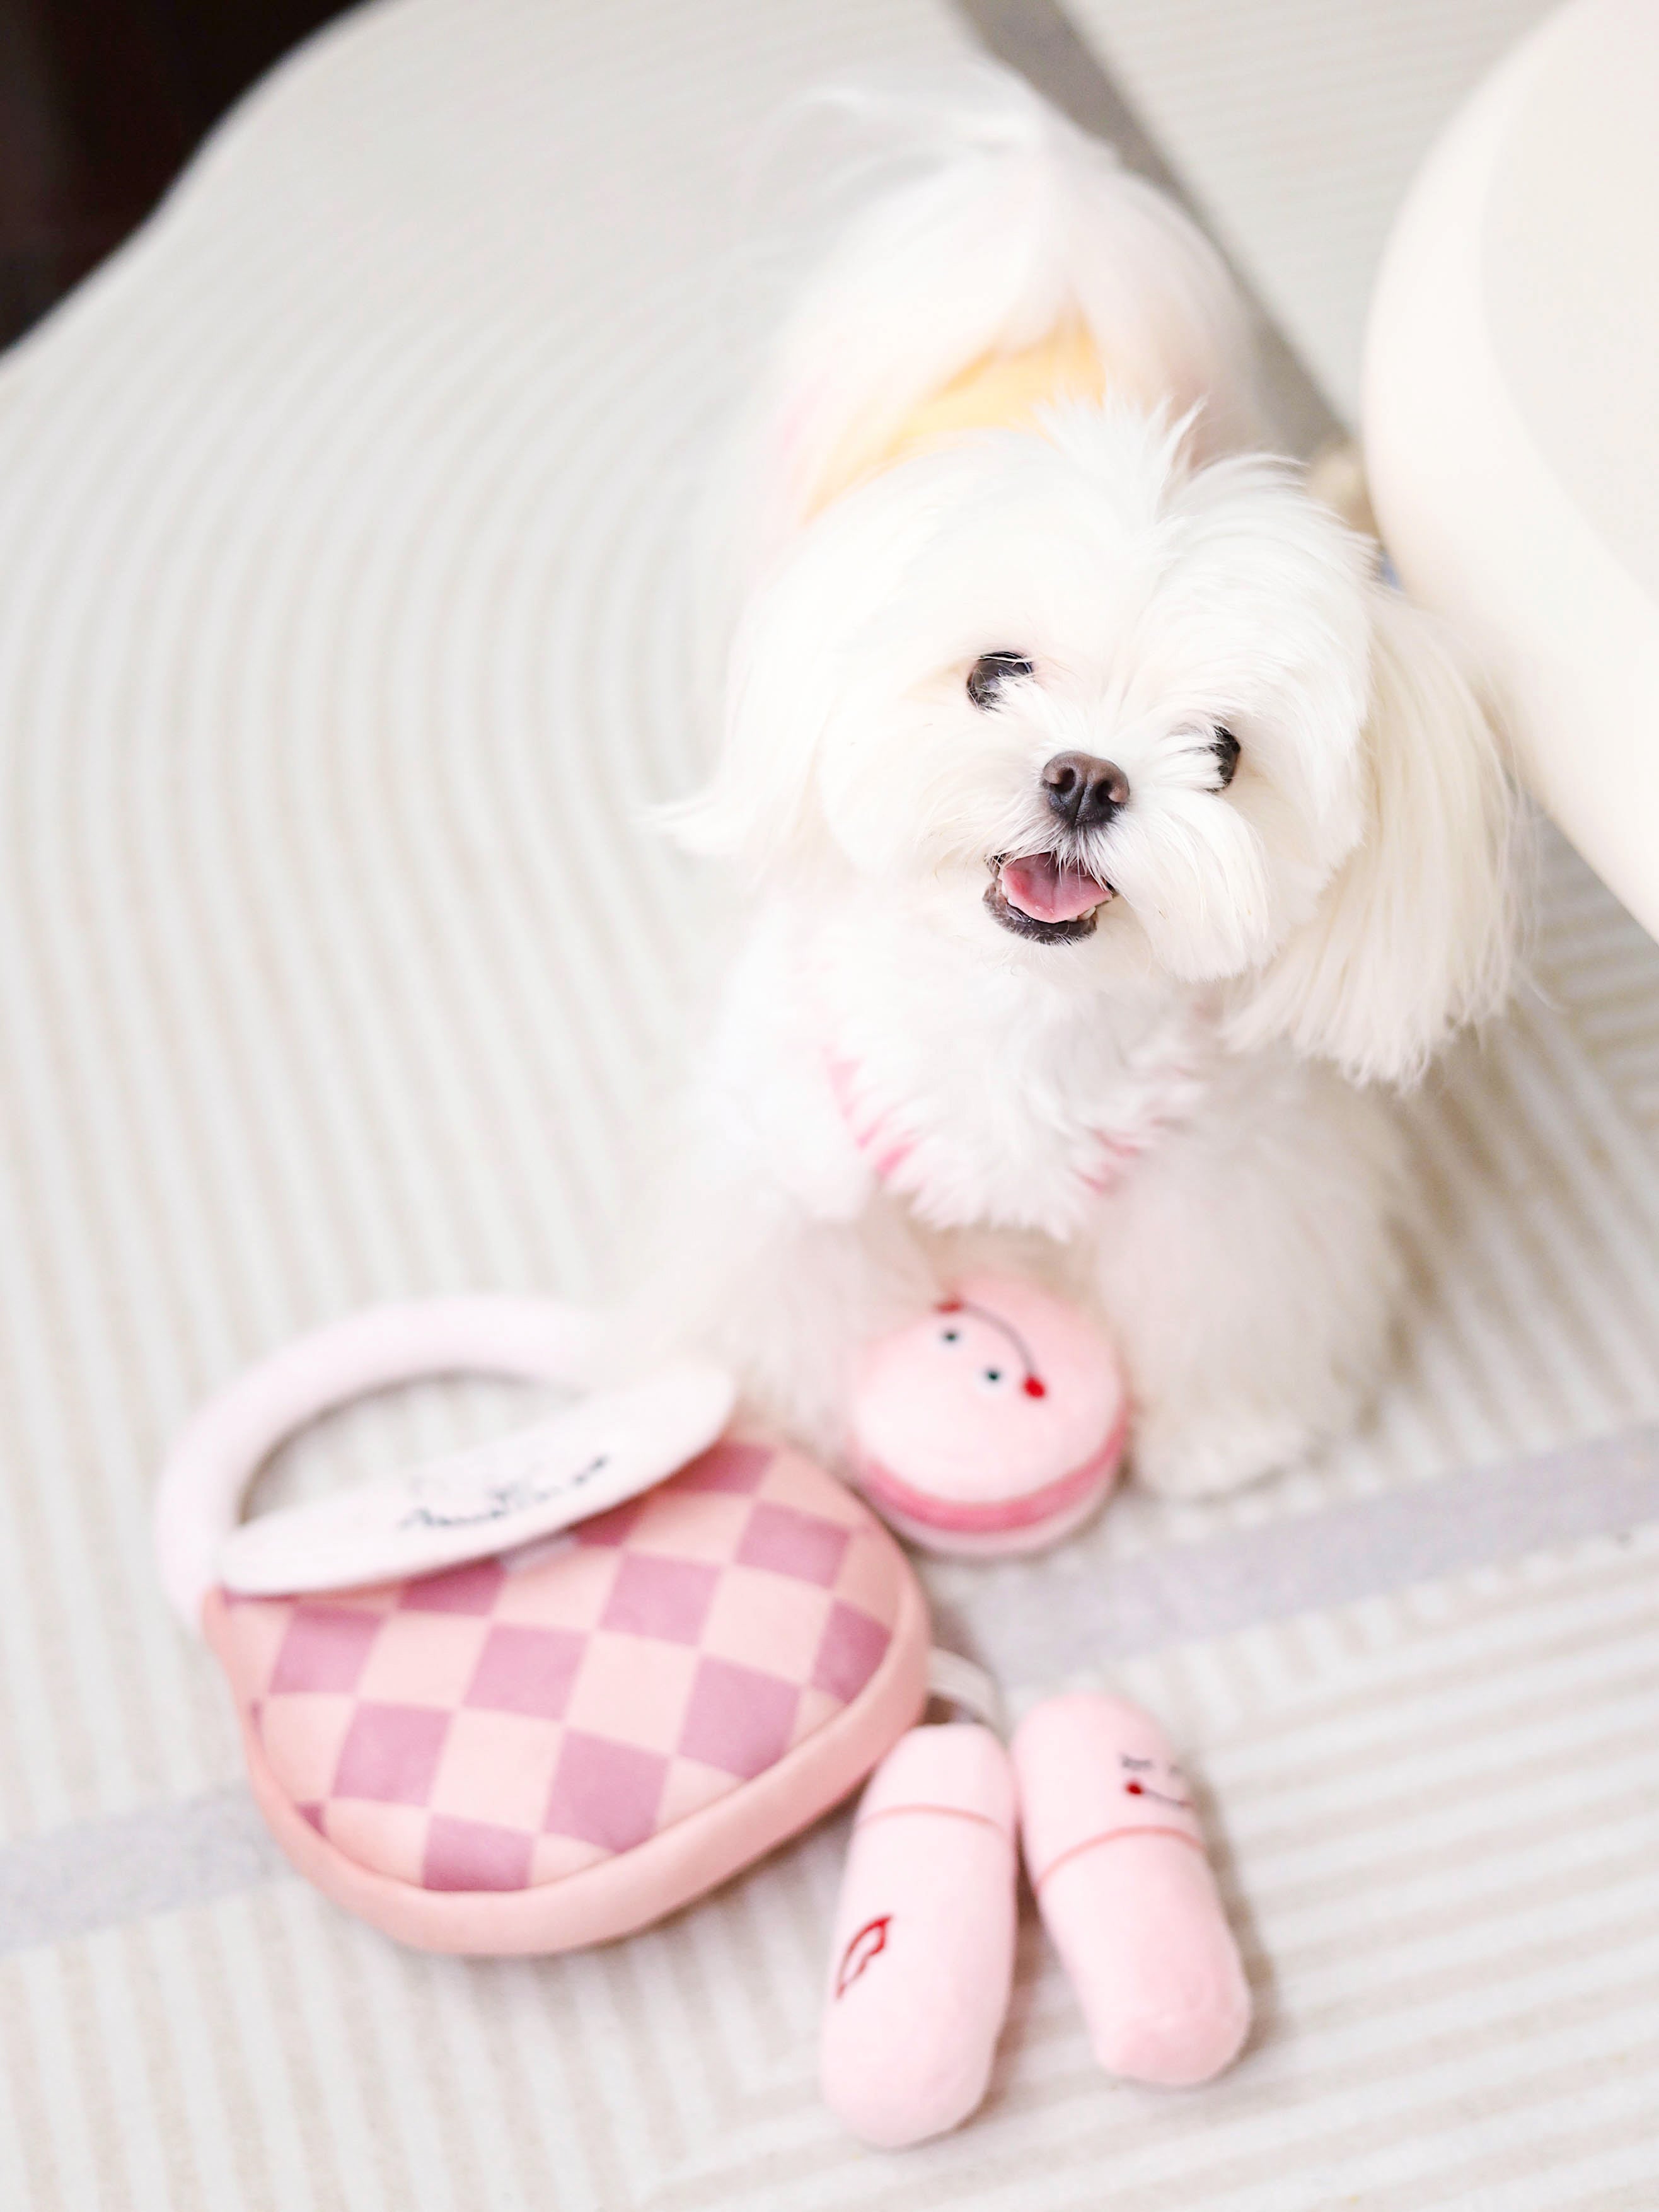 Why Do Dogs Like Pink Colors?